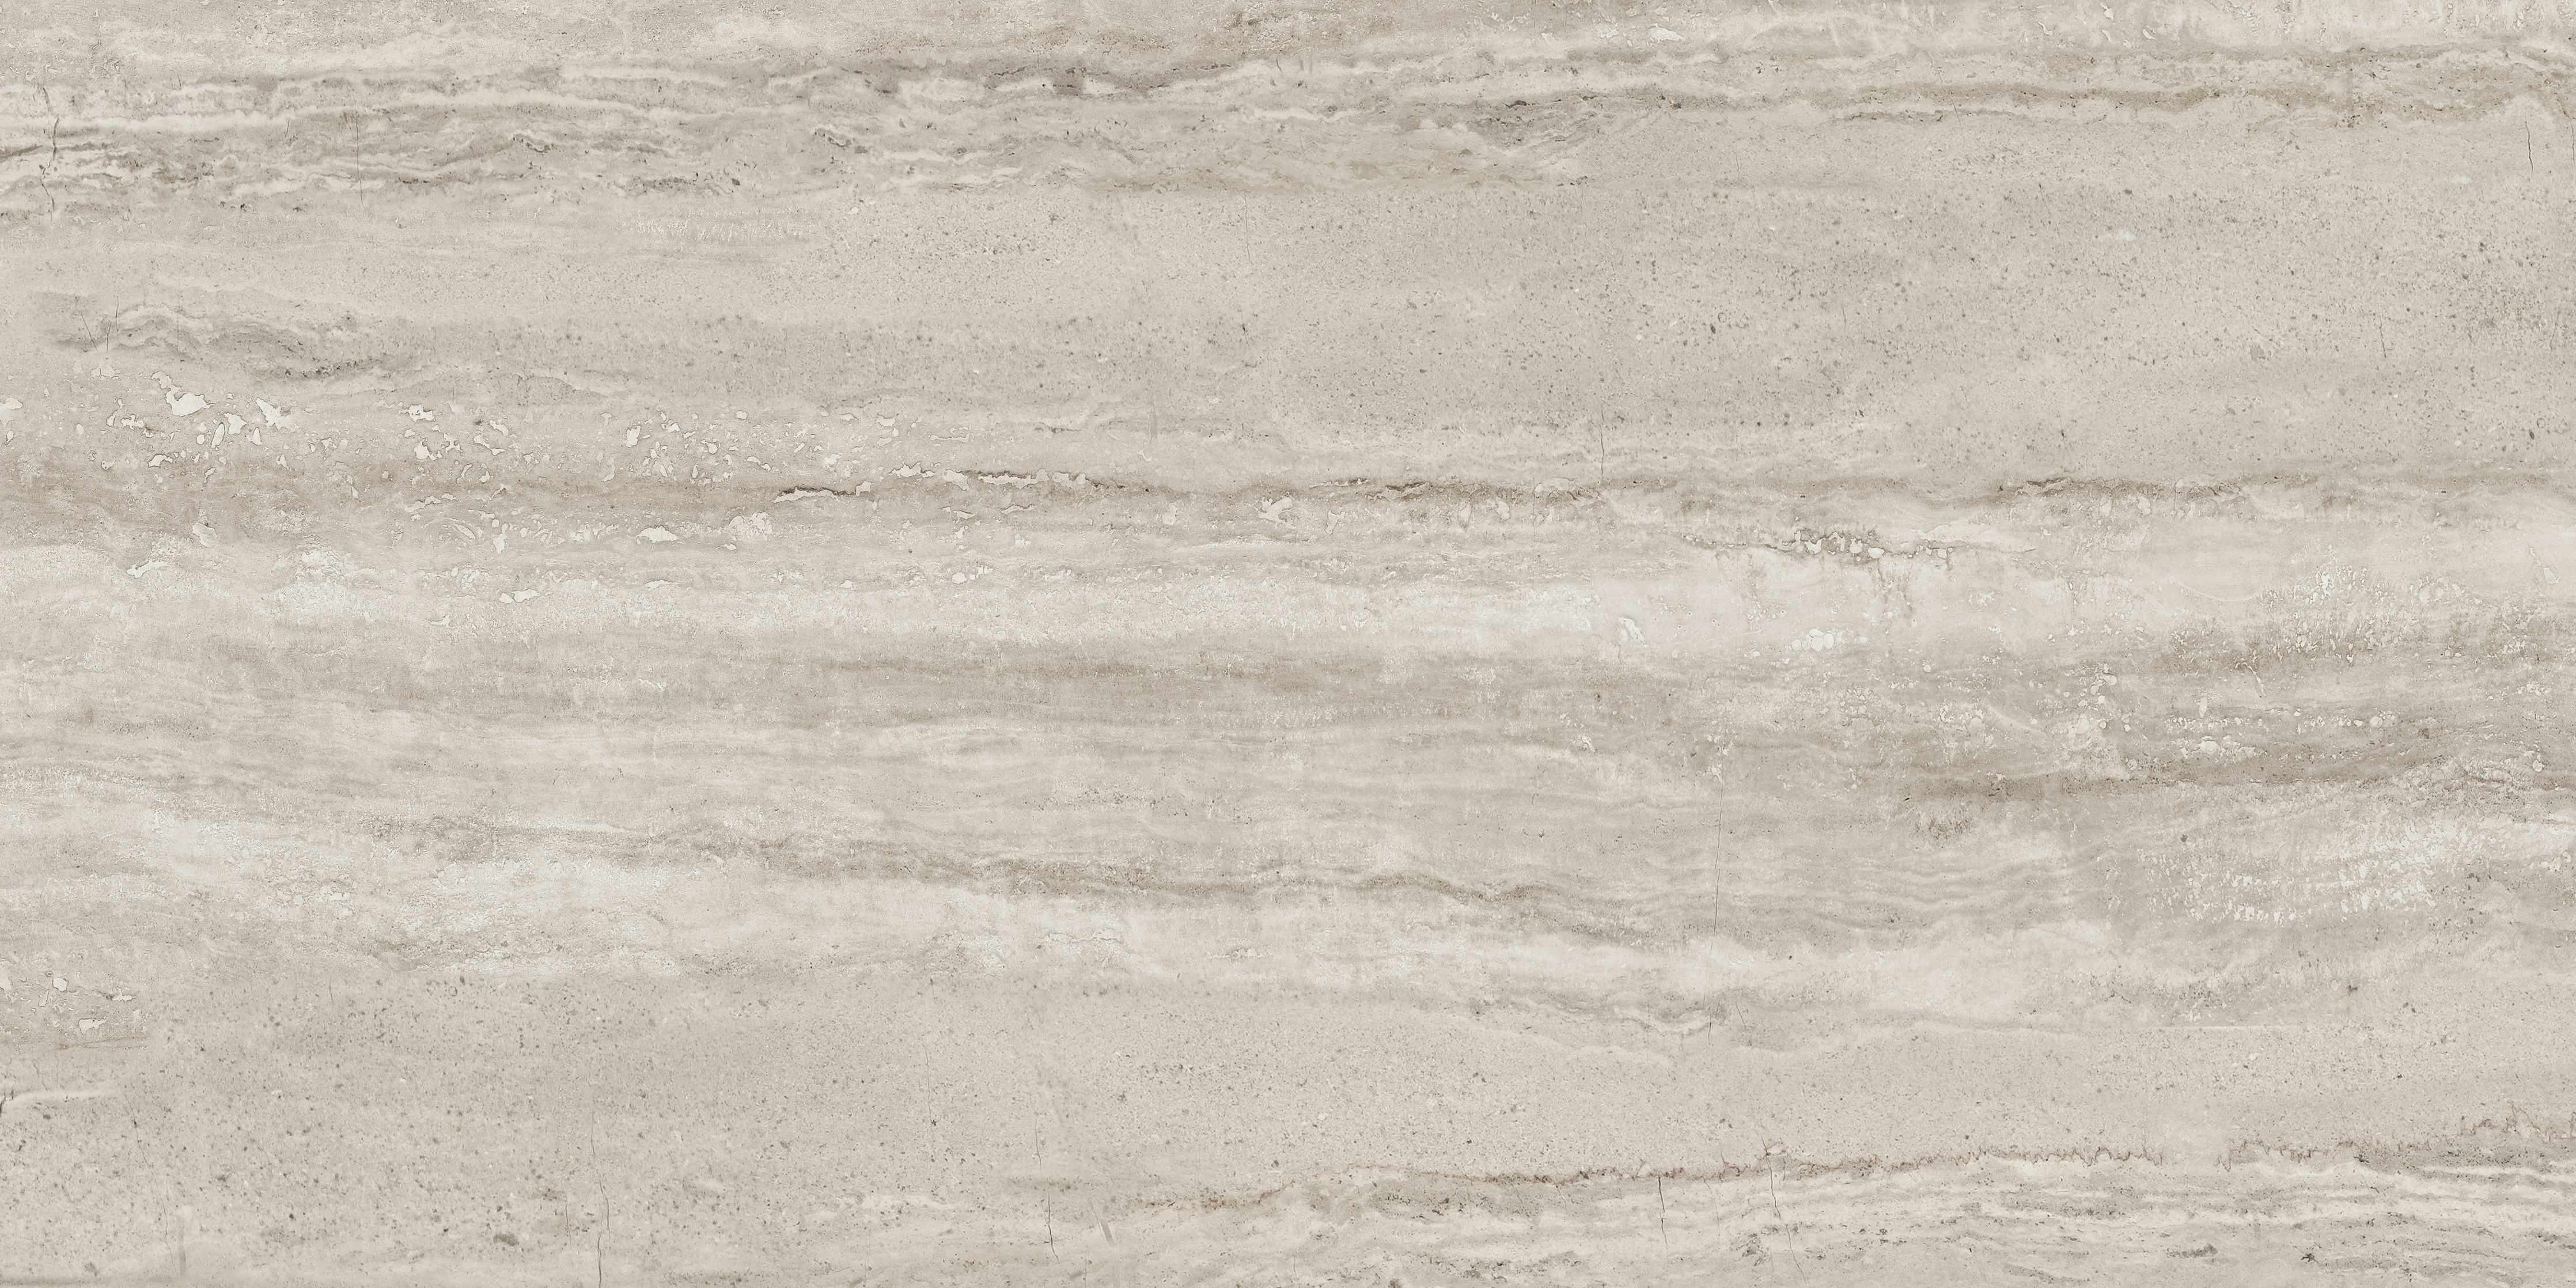 clay pattern glazed porcelain field tile from precept anatolia collection distributed by surface group international matte finish pressed edge 12x24 rectangle shape